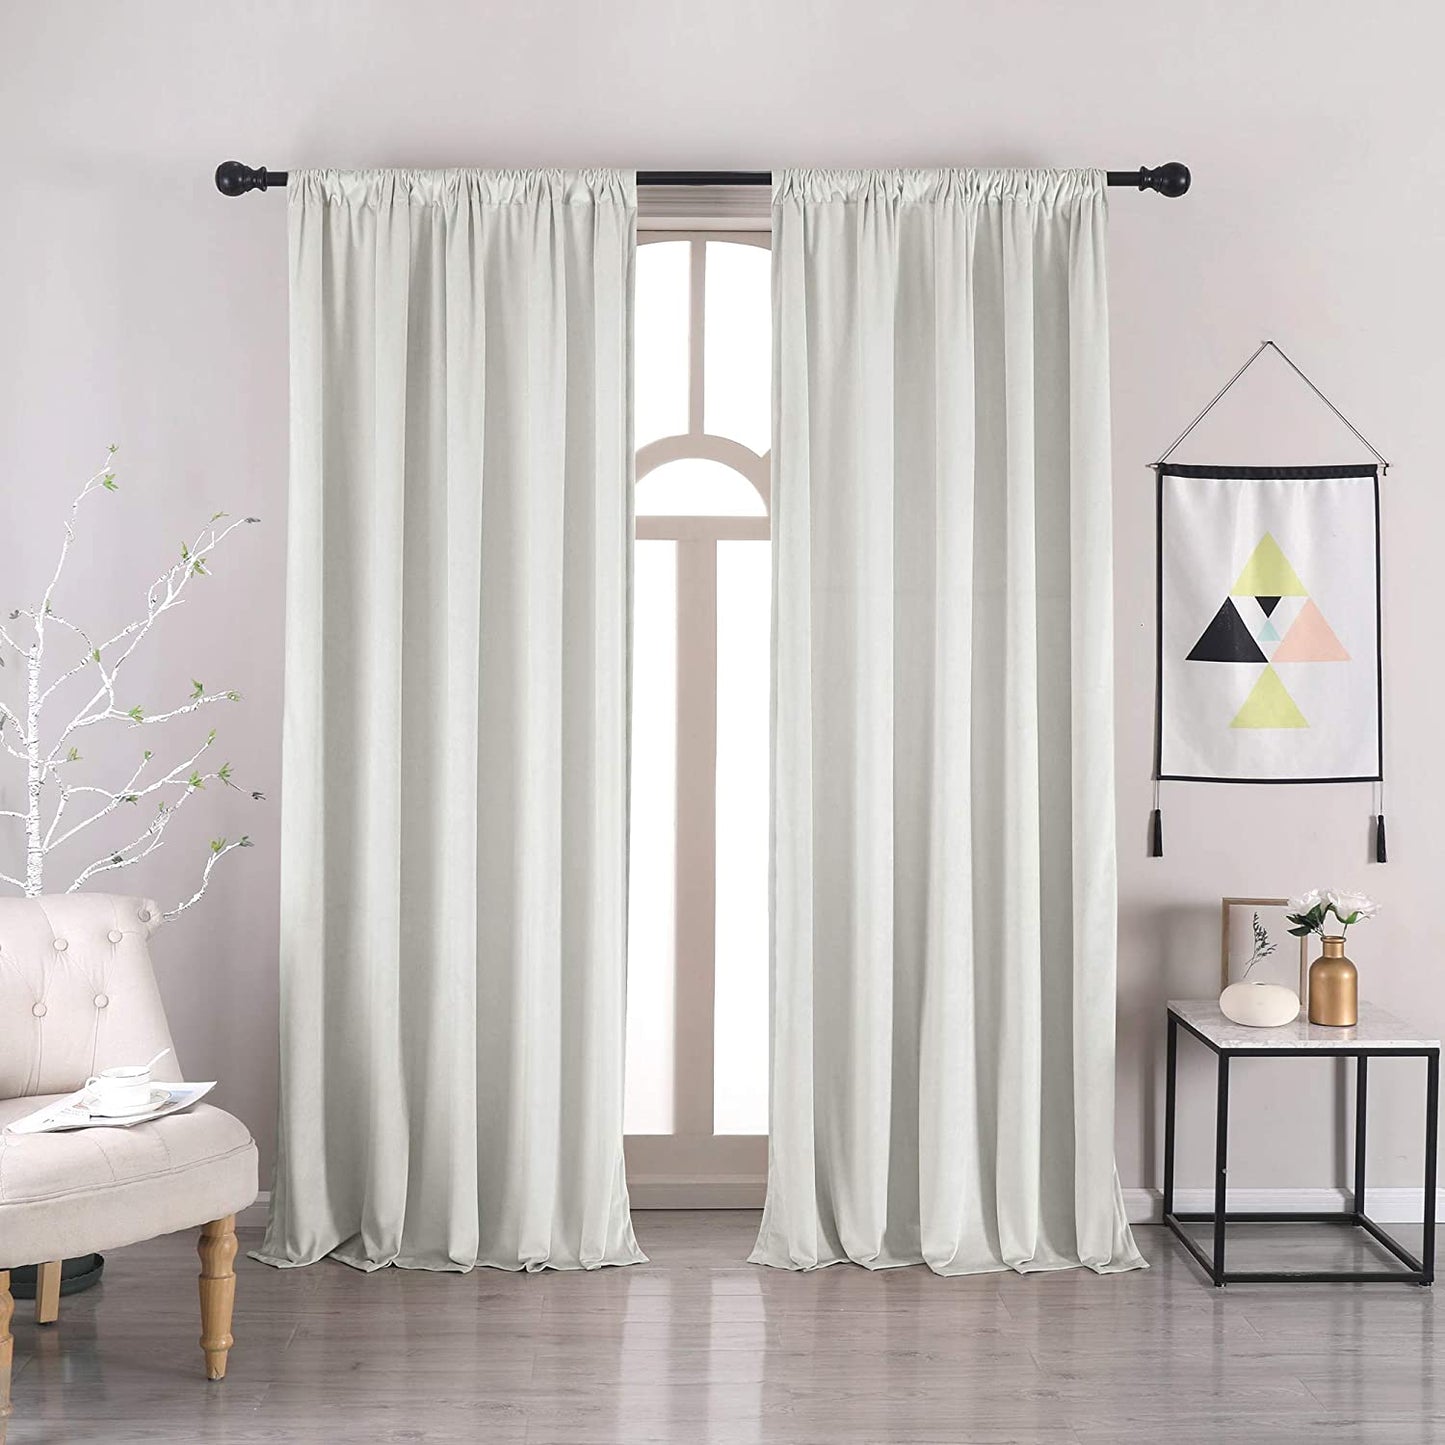 Nanbowang Green Velvet Curtains 63 Inches Long Dark Green Light Blocking Rod Pocket Window Curtain Panels Set of 2 Heat Insulated Curtains Thermal Curtain Panels for Bedroom  nanbowang Bleach 42"X84" 